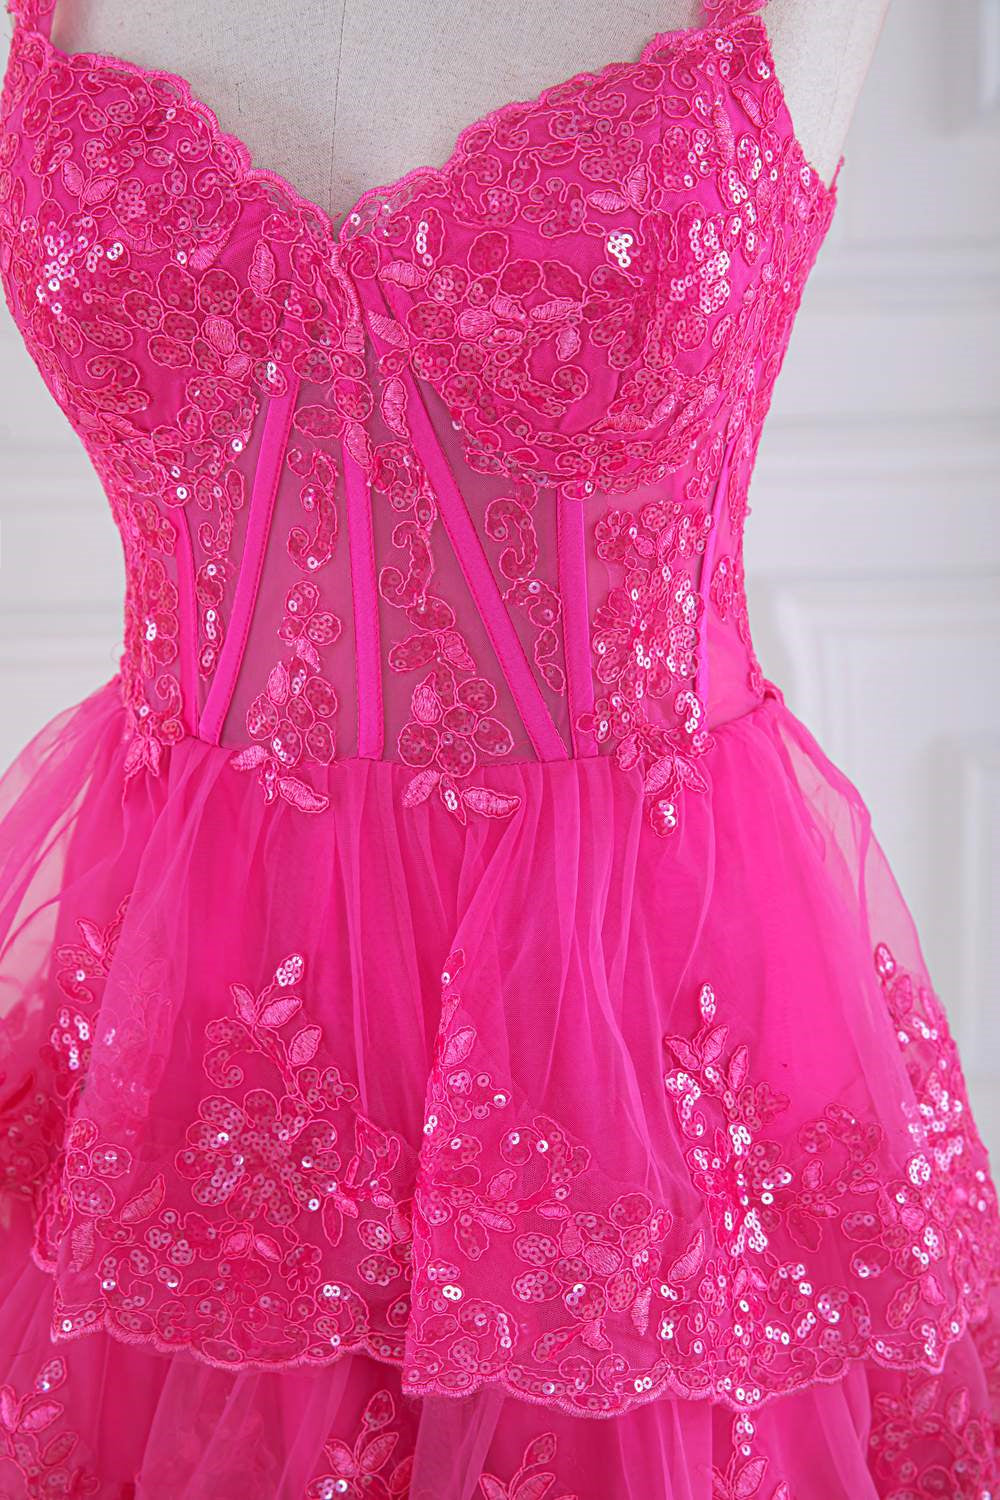 Prom Dress For Girl, Fuchsia Sweetheart Corset Sequin Layered Ball Gown